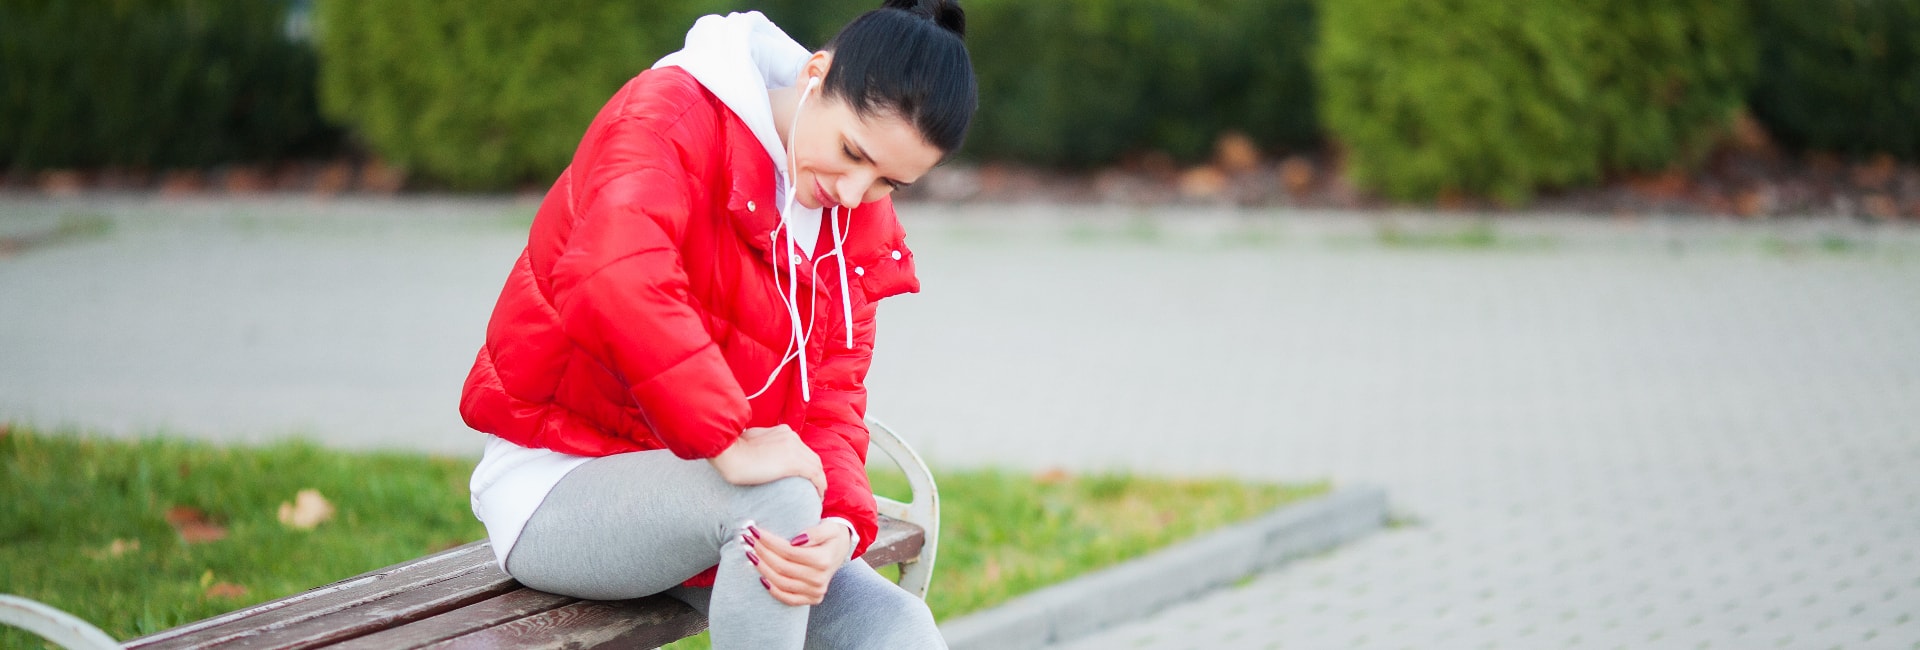 woman holds her knee in pain while sitting outdoors on a cool day after a workout